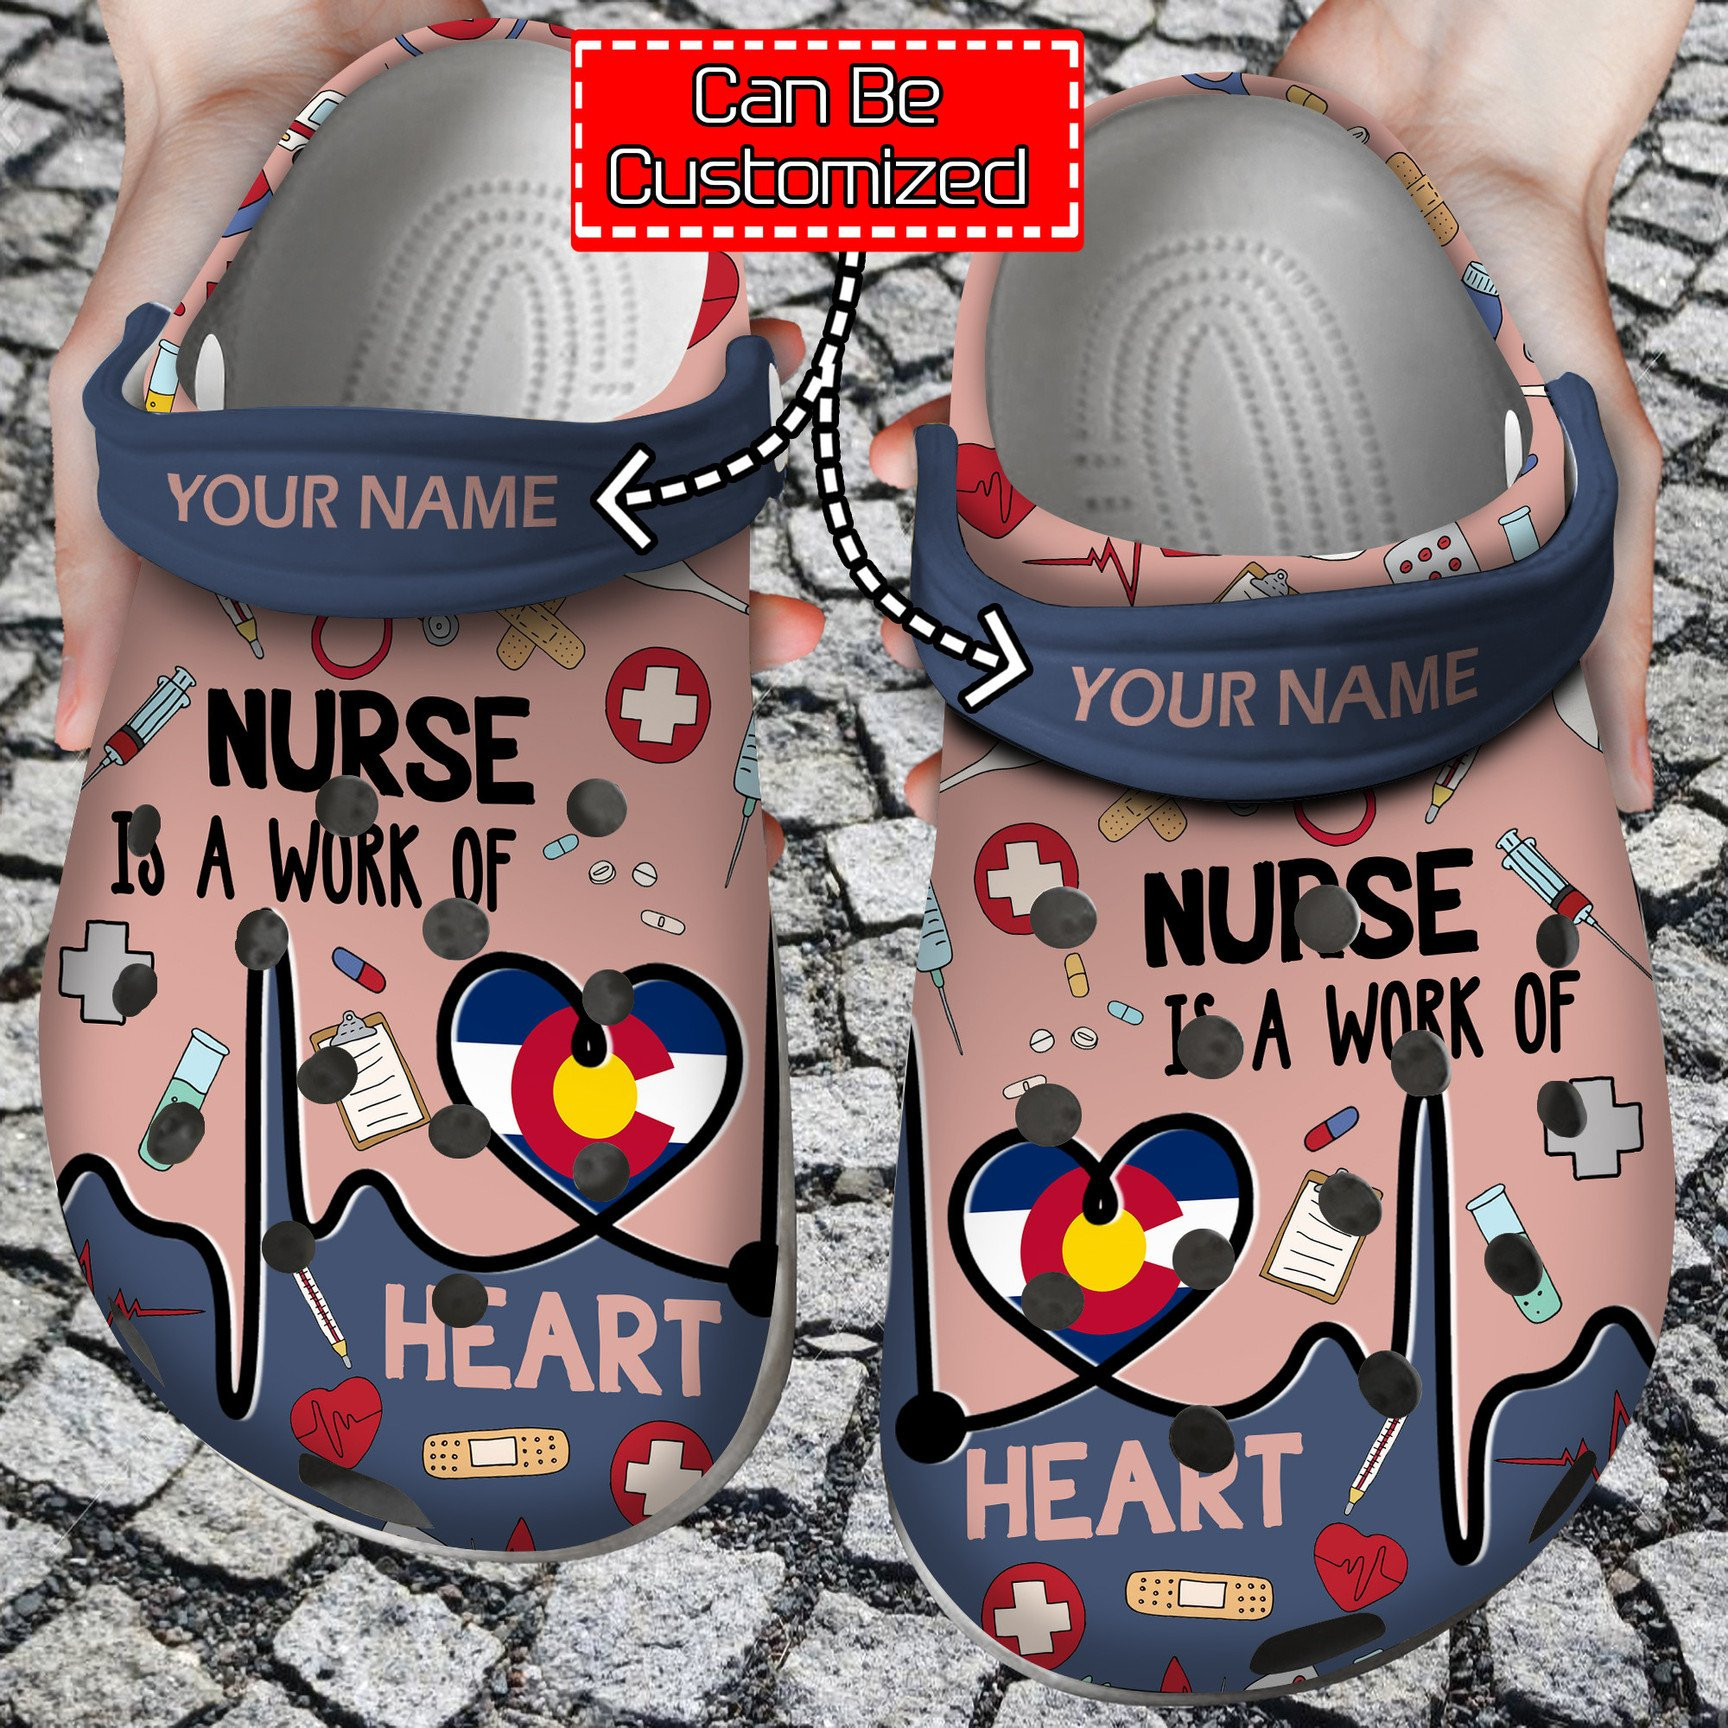 Nurse Is A Work Of Heart Personalized Crocs Clog Shoes With Your Name Nurse Crocs